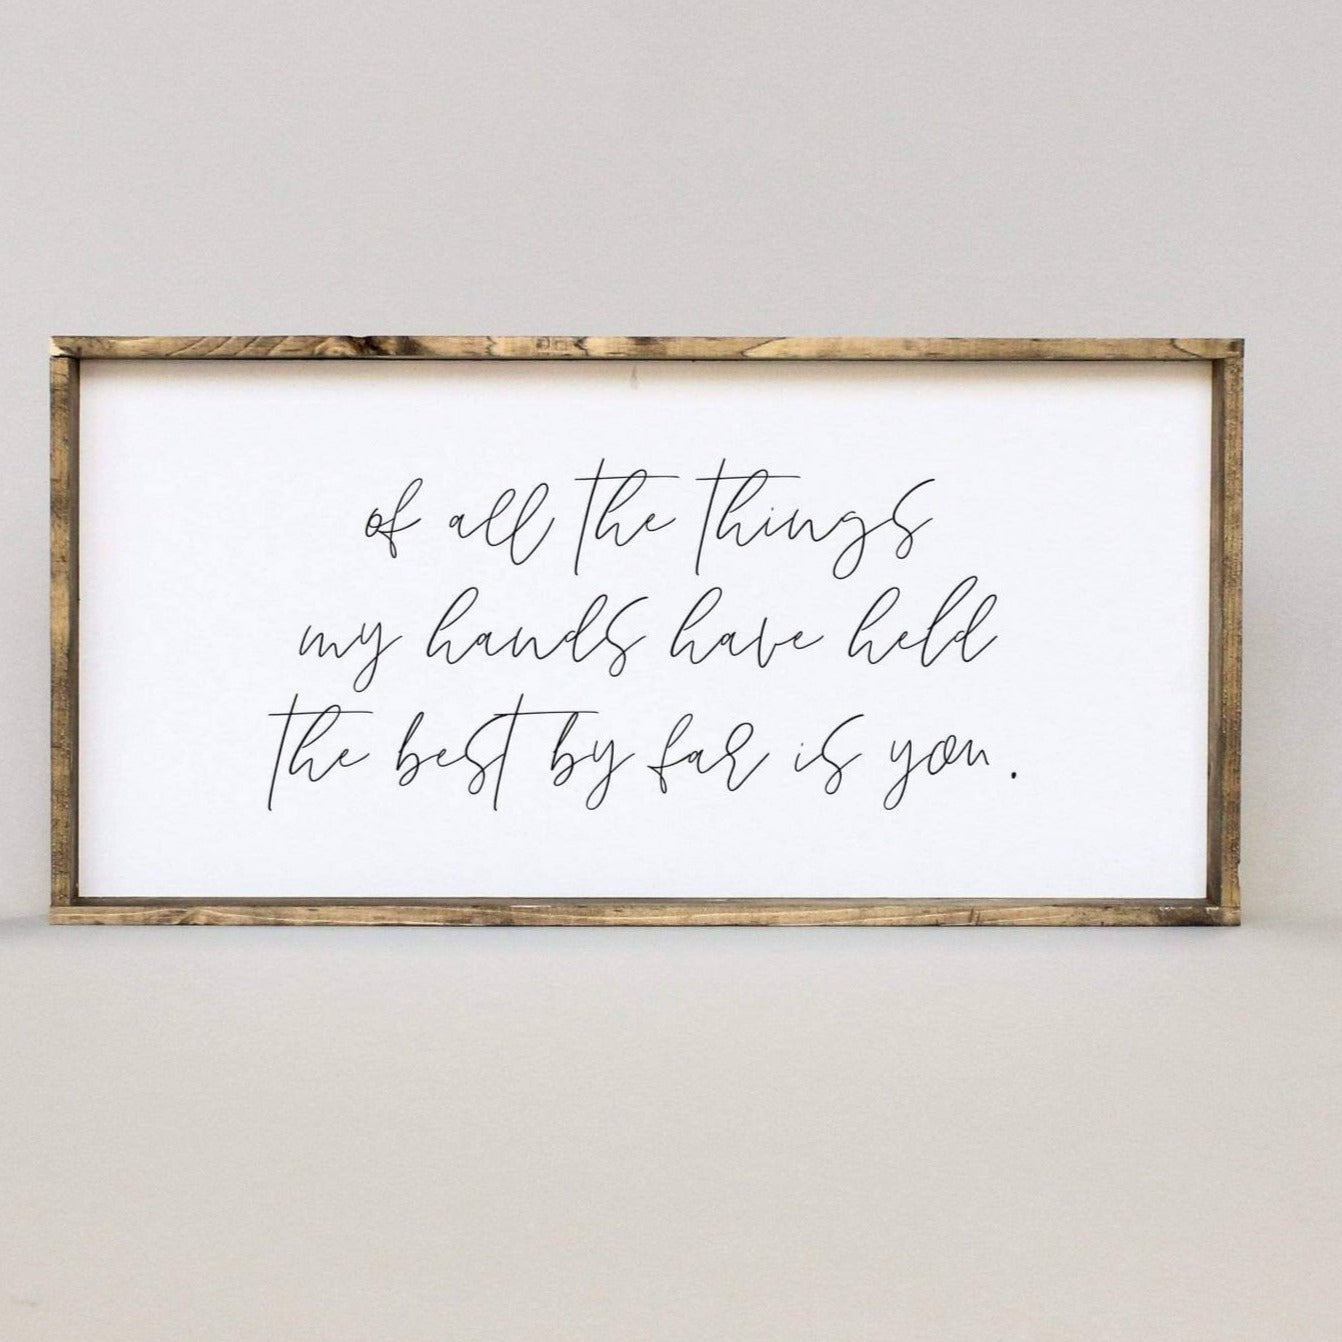 Wall Décor- "Of All The Things That I Have Held, The Best By Far Is You" 12x24"